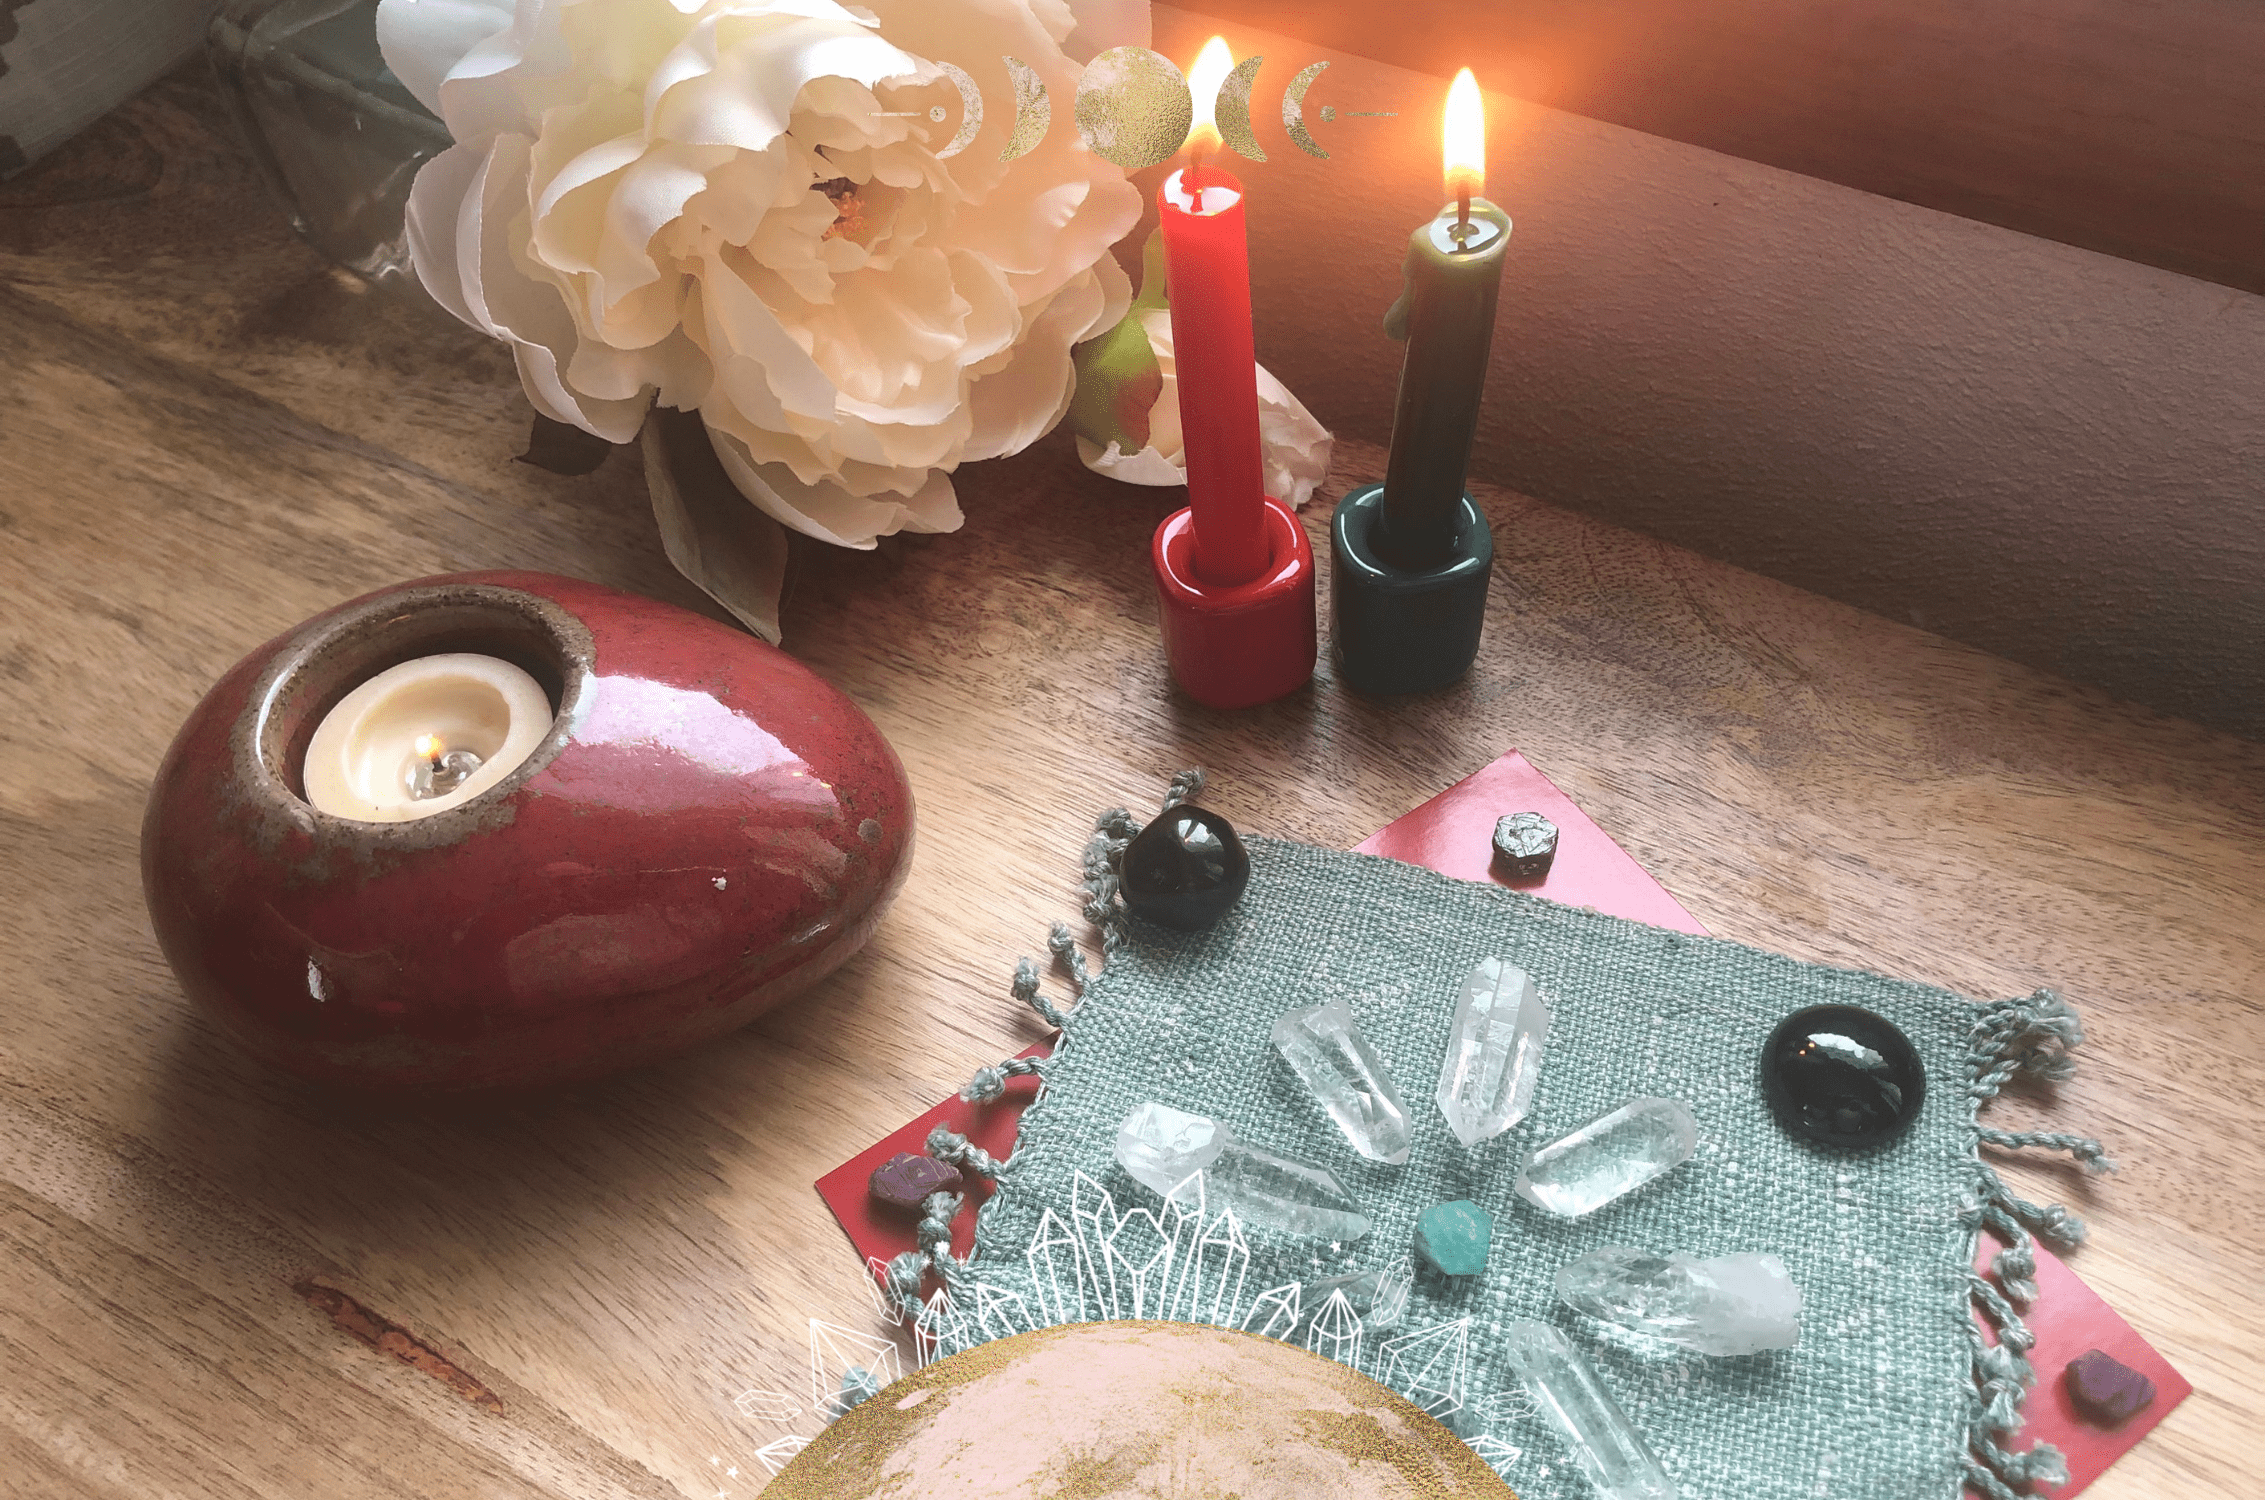 A Crystal Grid Recipe for Wellness